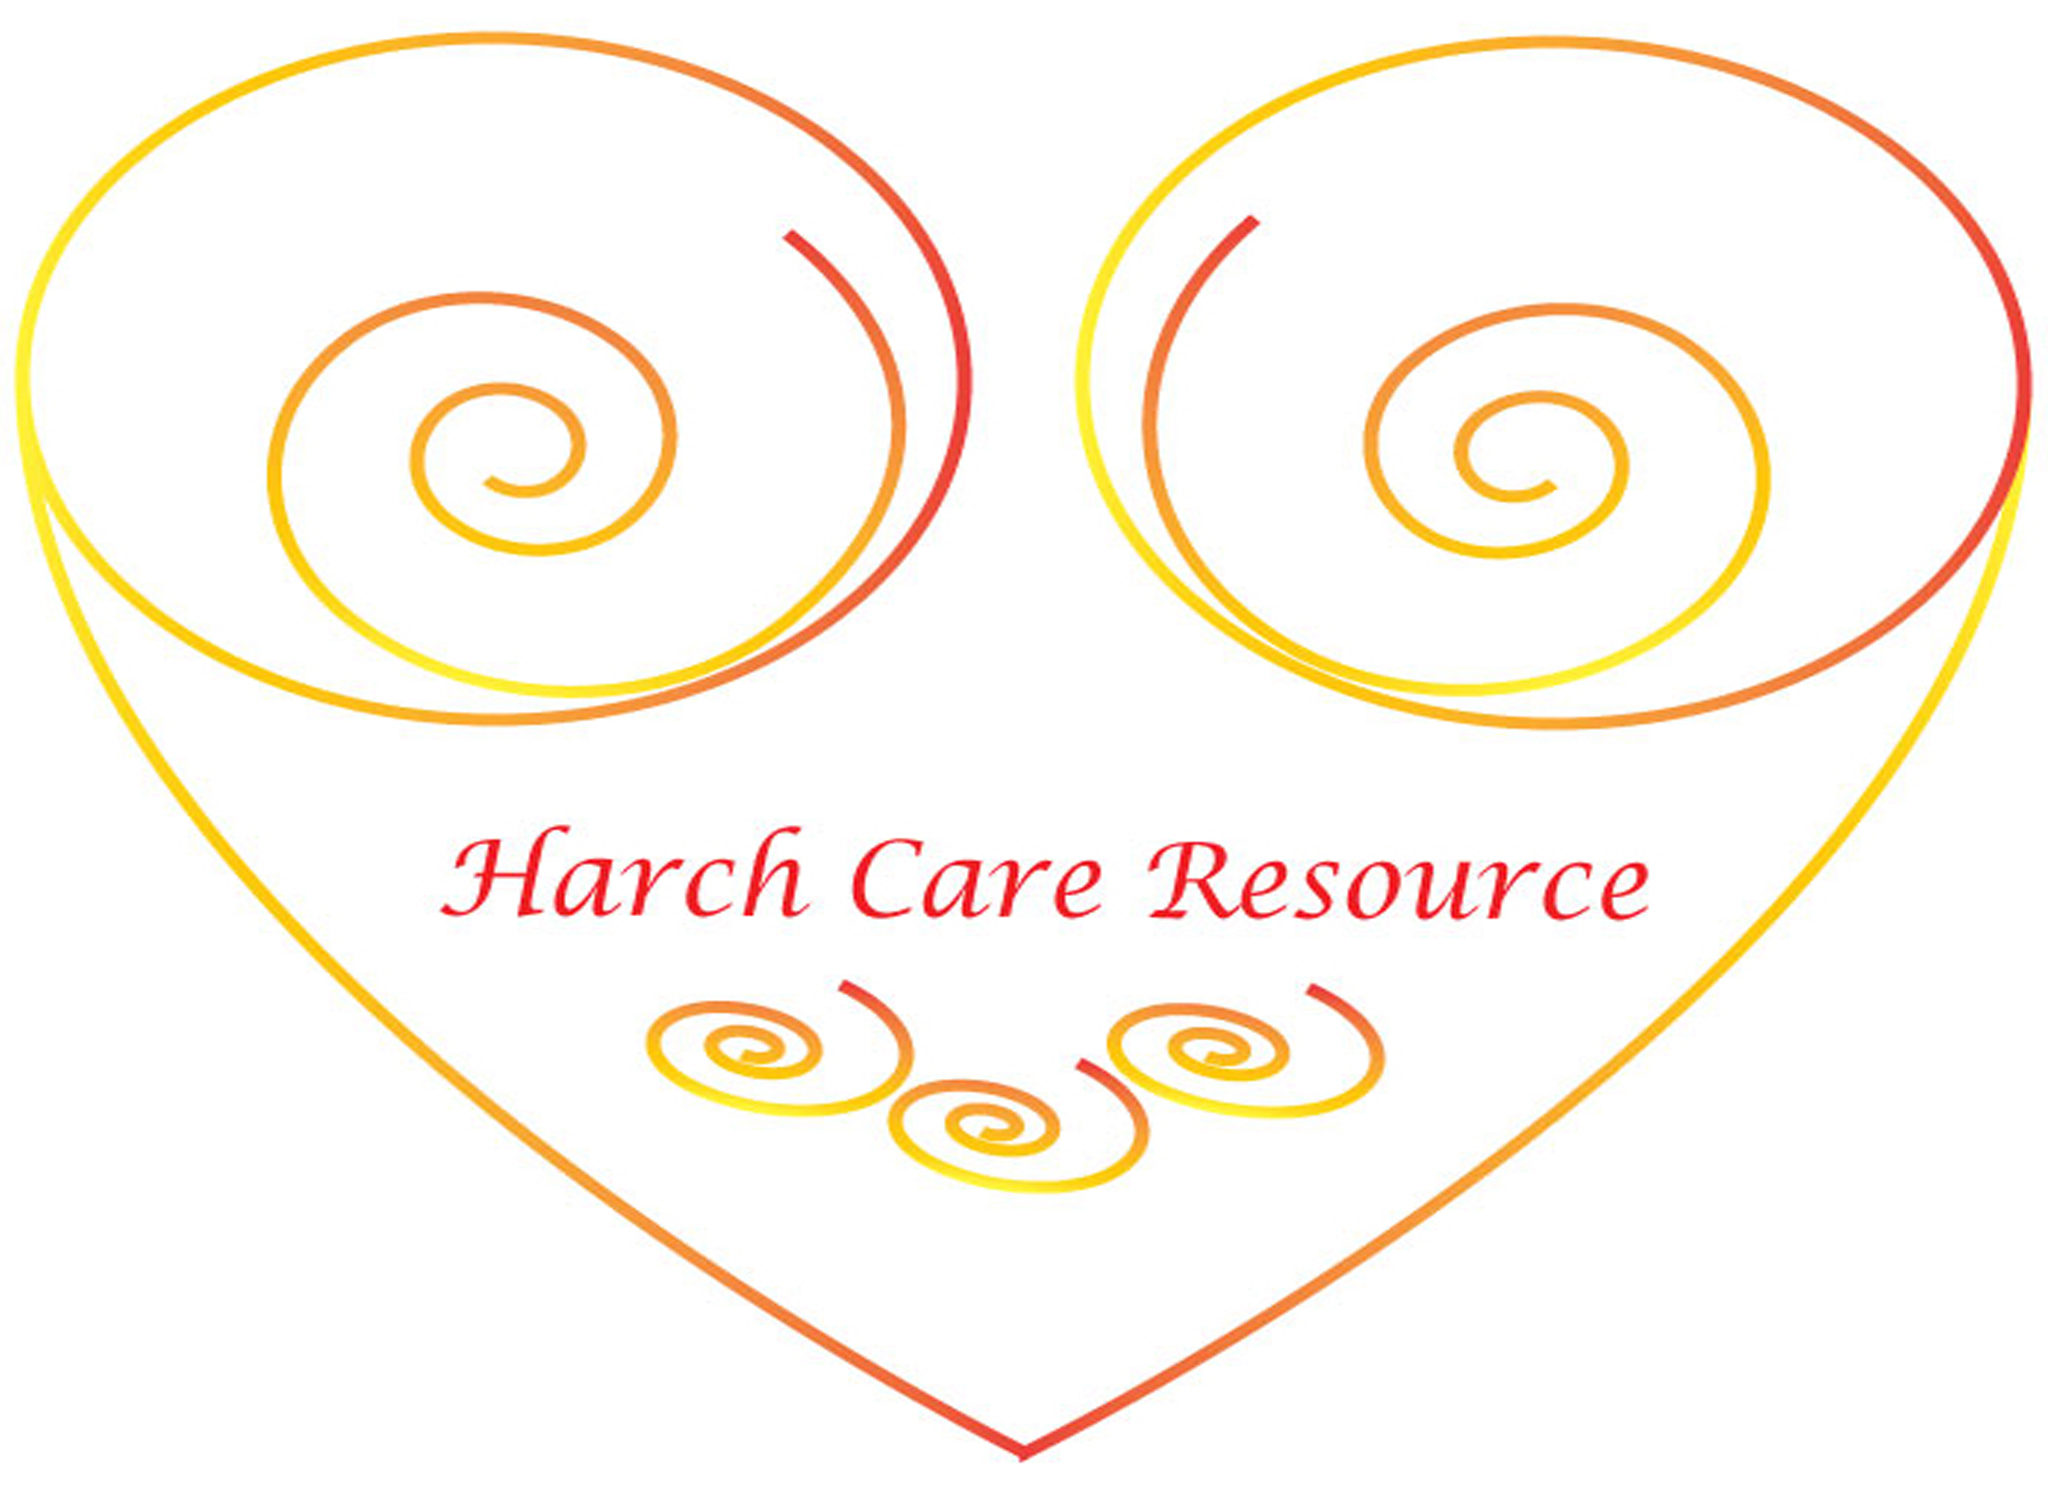 Harch Care Resource